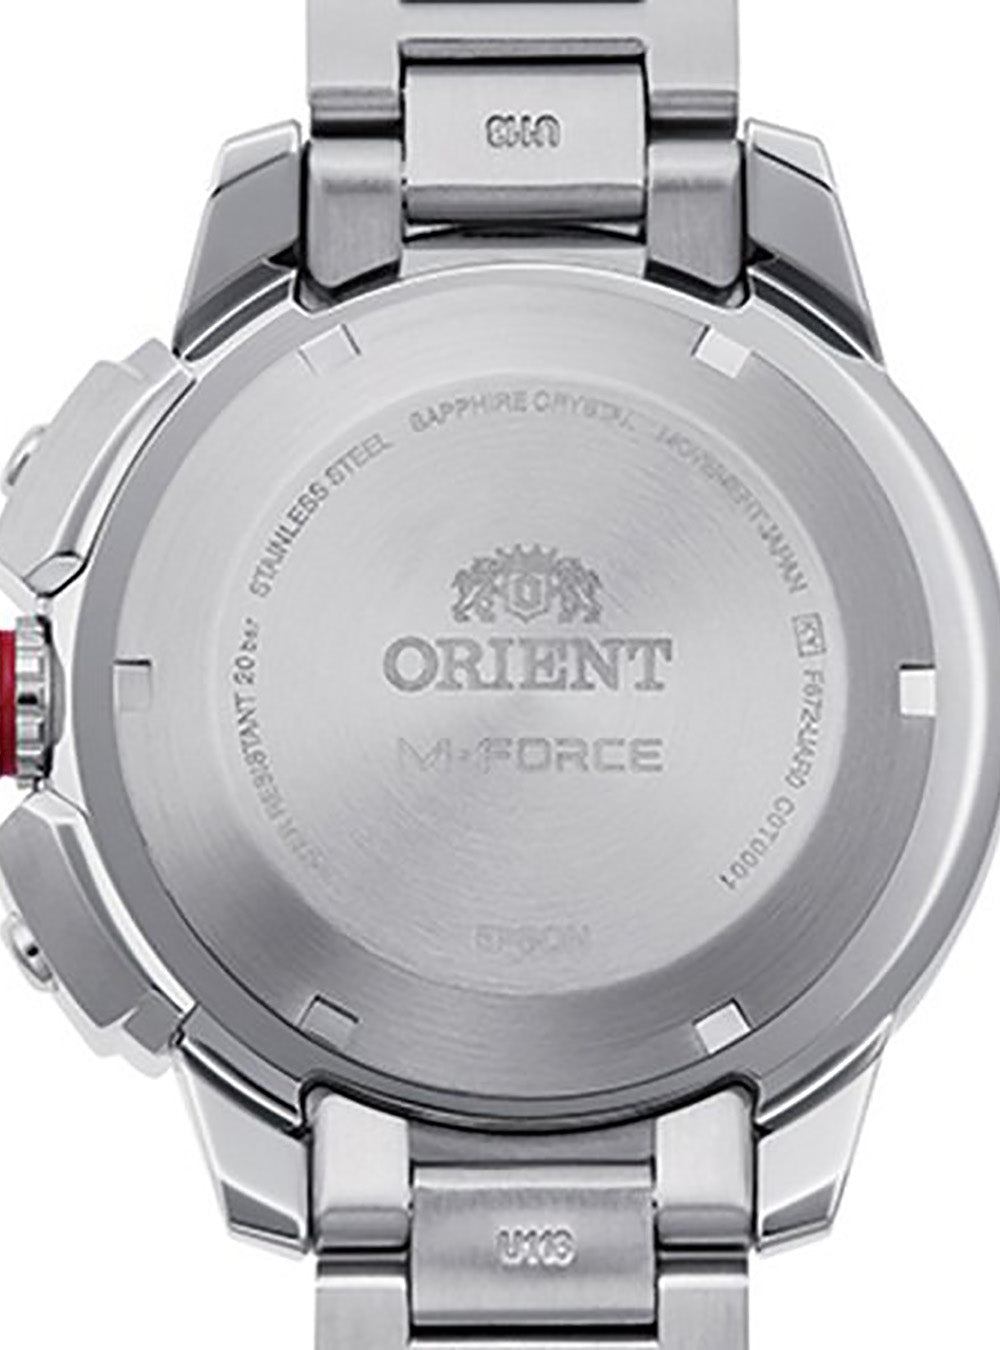 ORIENT SPORTS M-FORCE RN-AC0N01B MADE IN JAPAN JDM